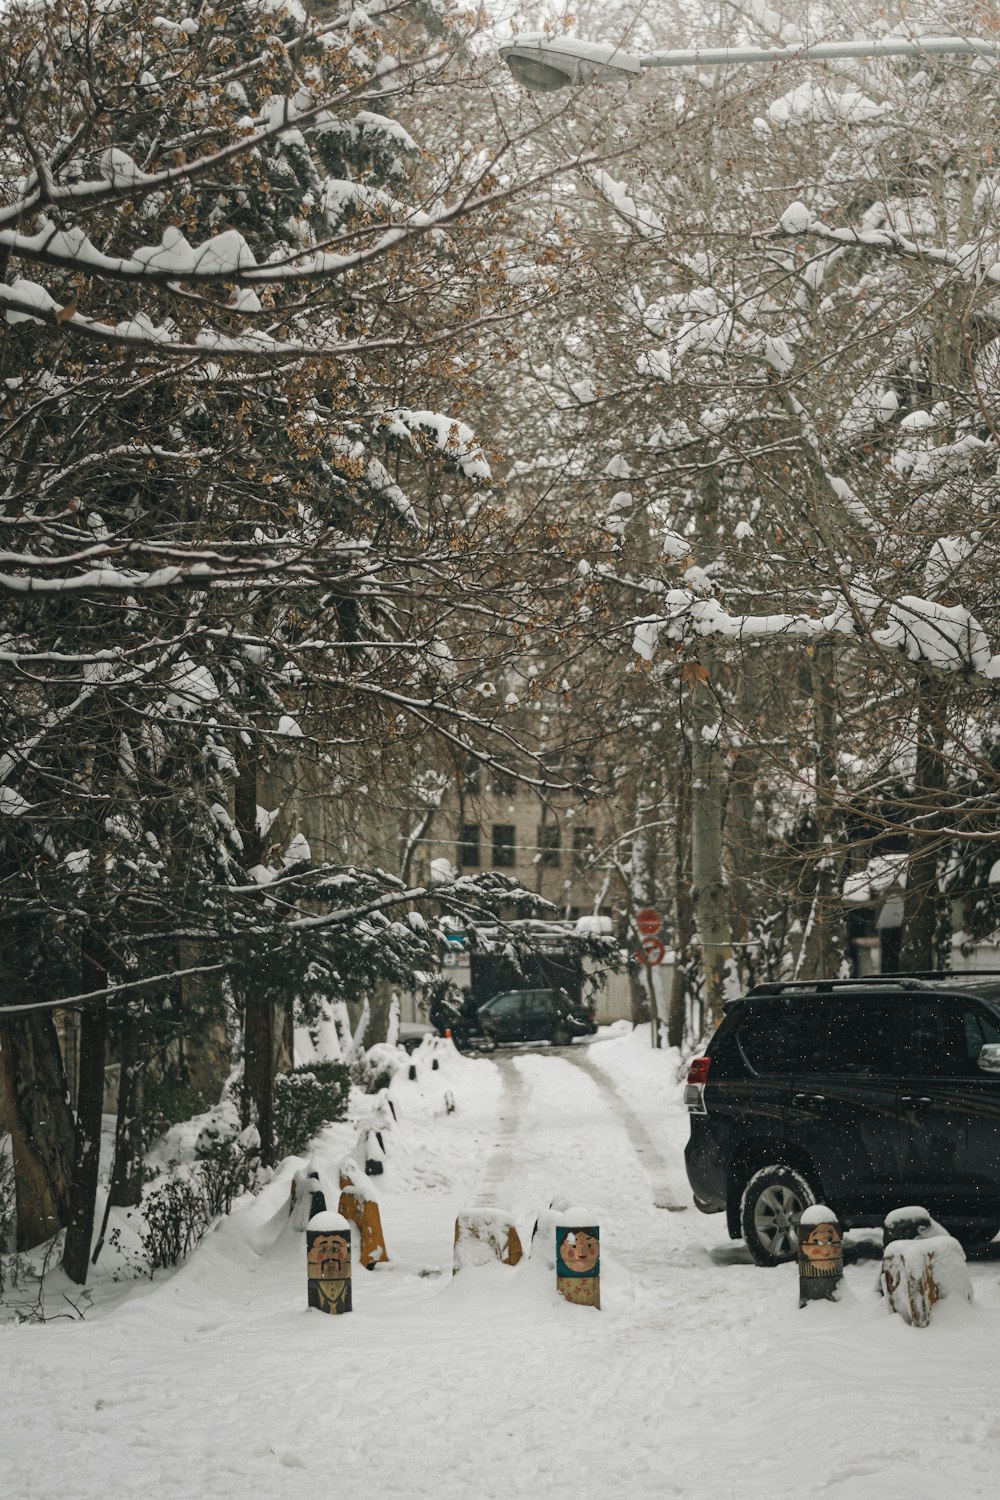 a black truck is parked on a snowy street